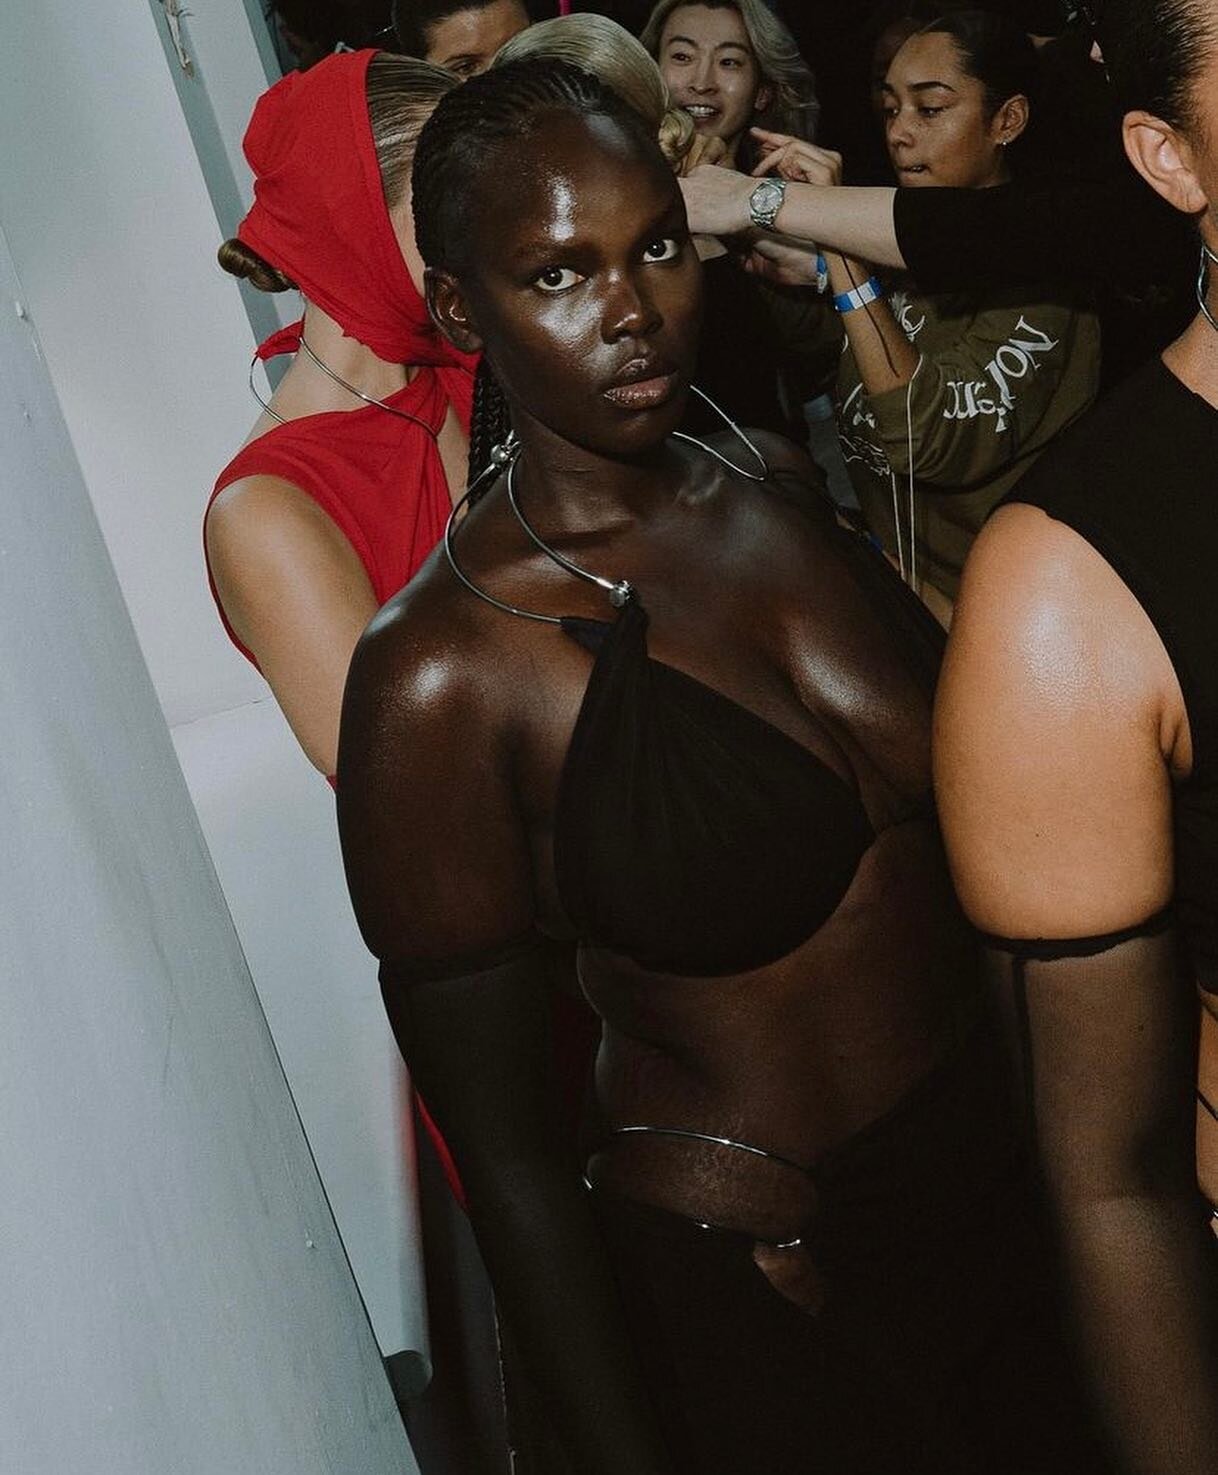 Some behind the scenes pictures of @karolinevitto first LFW show hosted by @fashion_east presenting SS23 ✨

Karoline Vitto is a Brazilian designer who revolves her work around accentuating and embracing curves and folds. Check out her latest work @ka